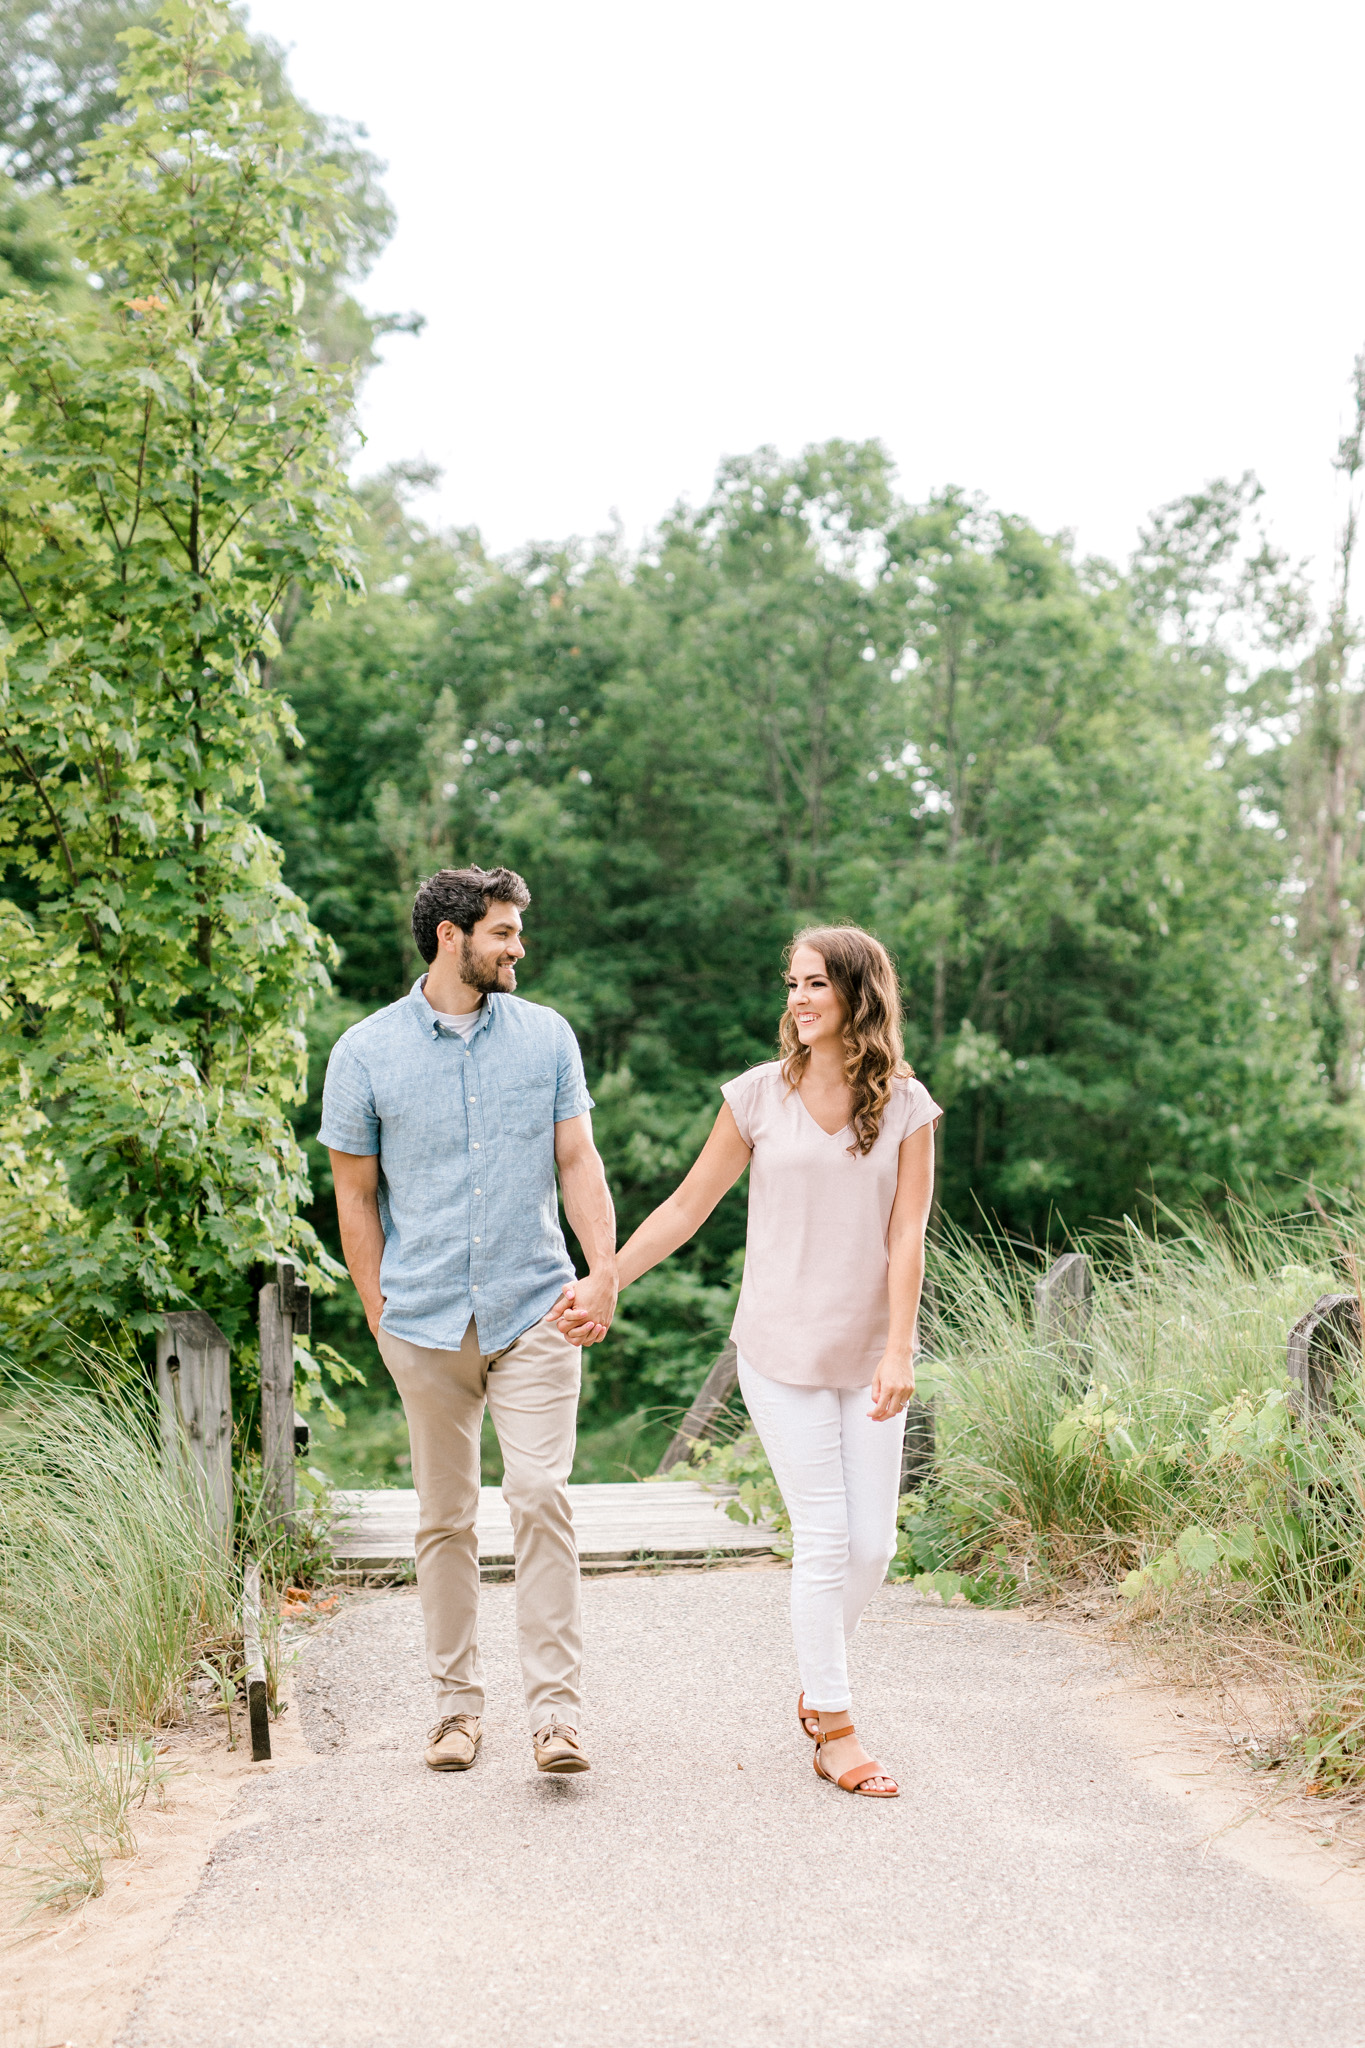 Romantic Engagement Session at Lake Michigan | Beach Engagement | What to Wear to your Engagement Session | West Michigan Wedding Photographer